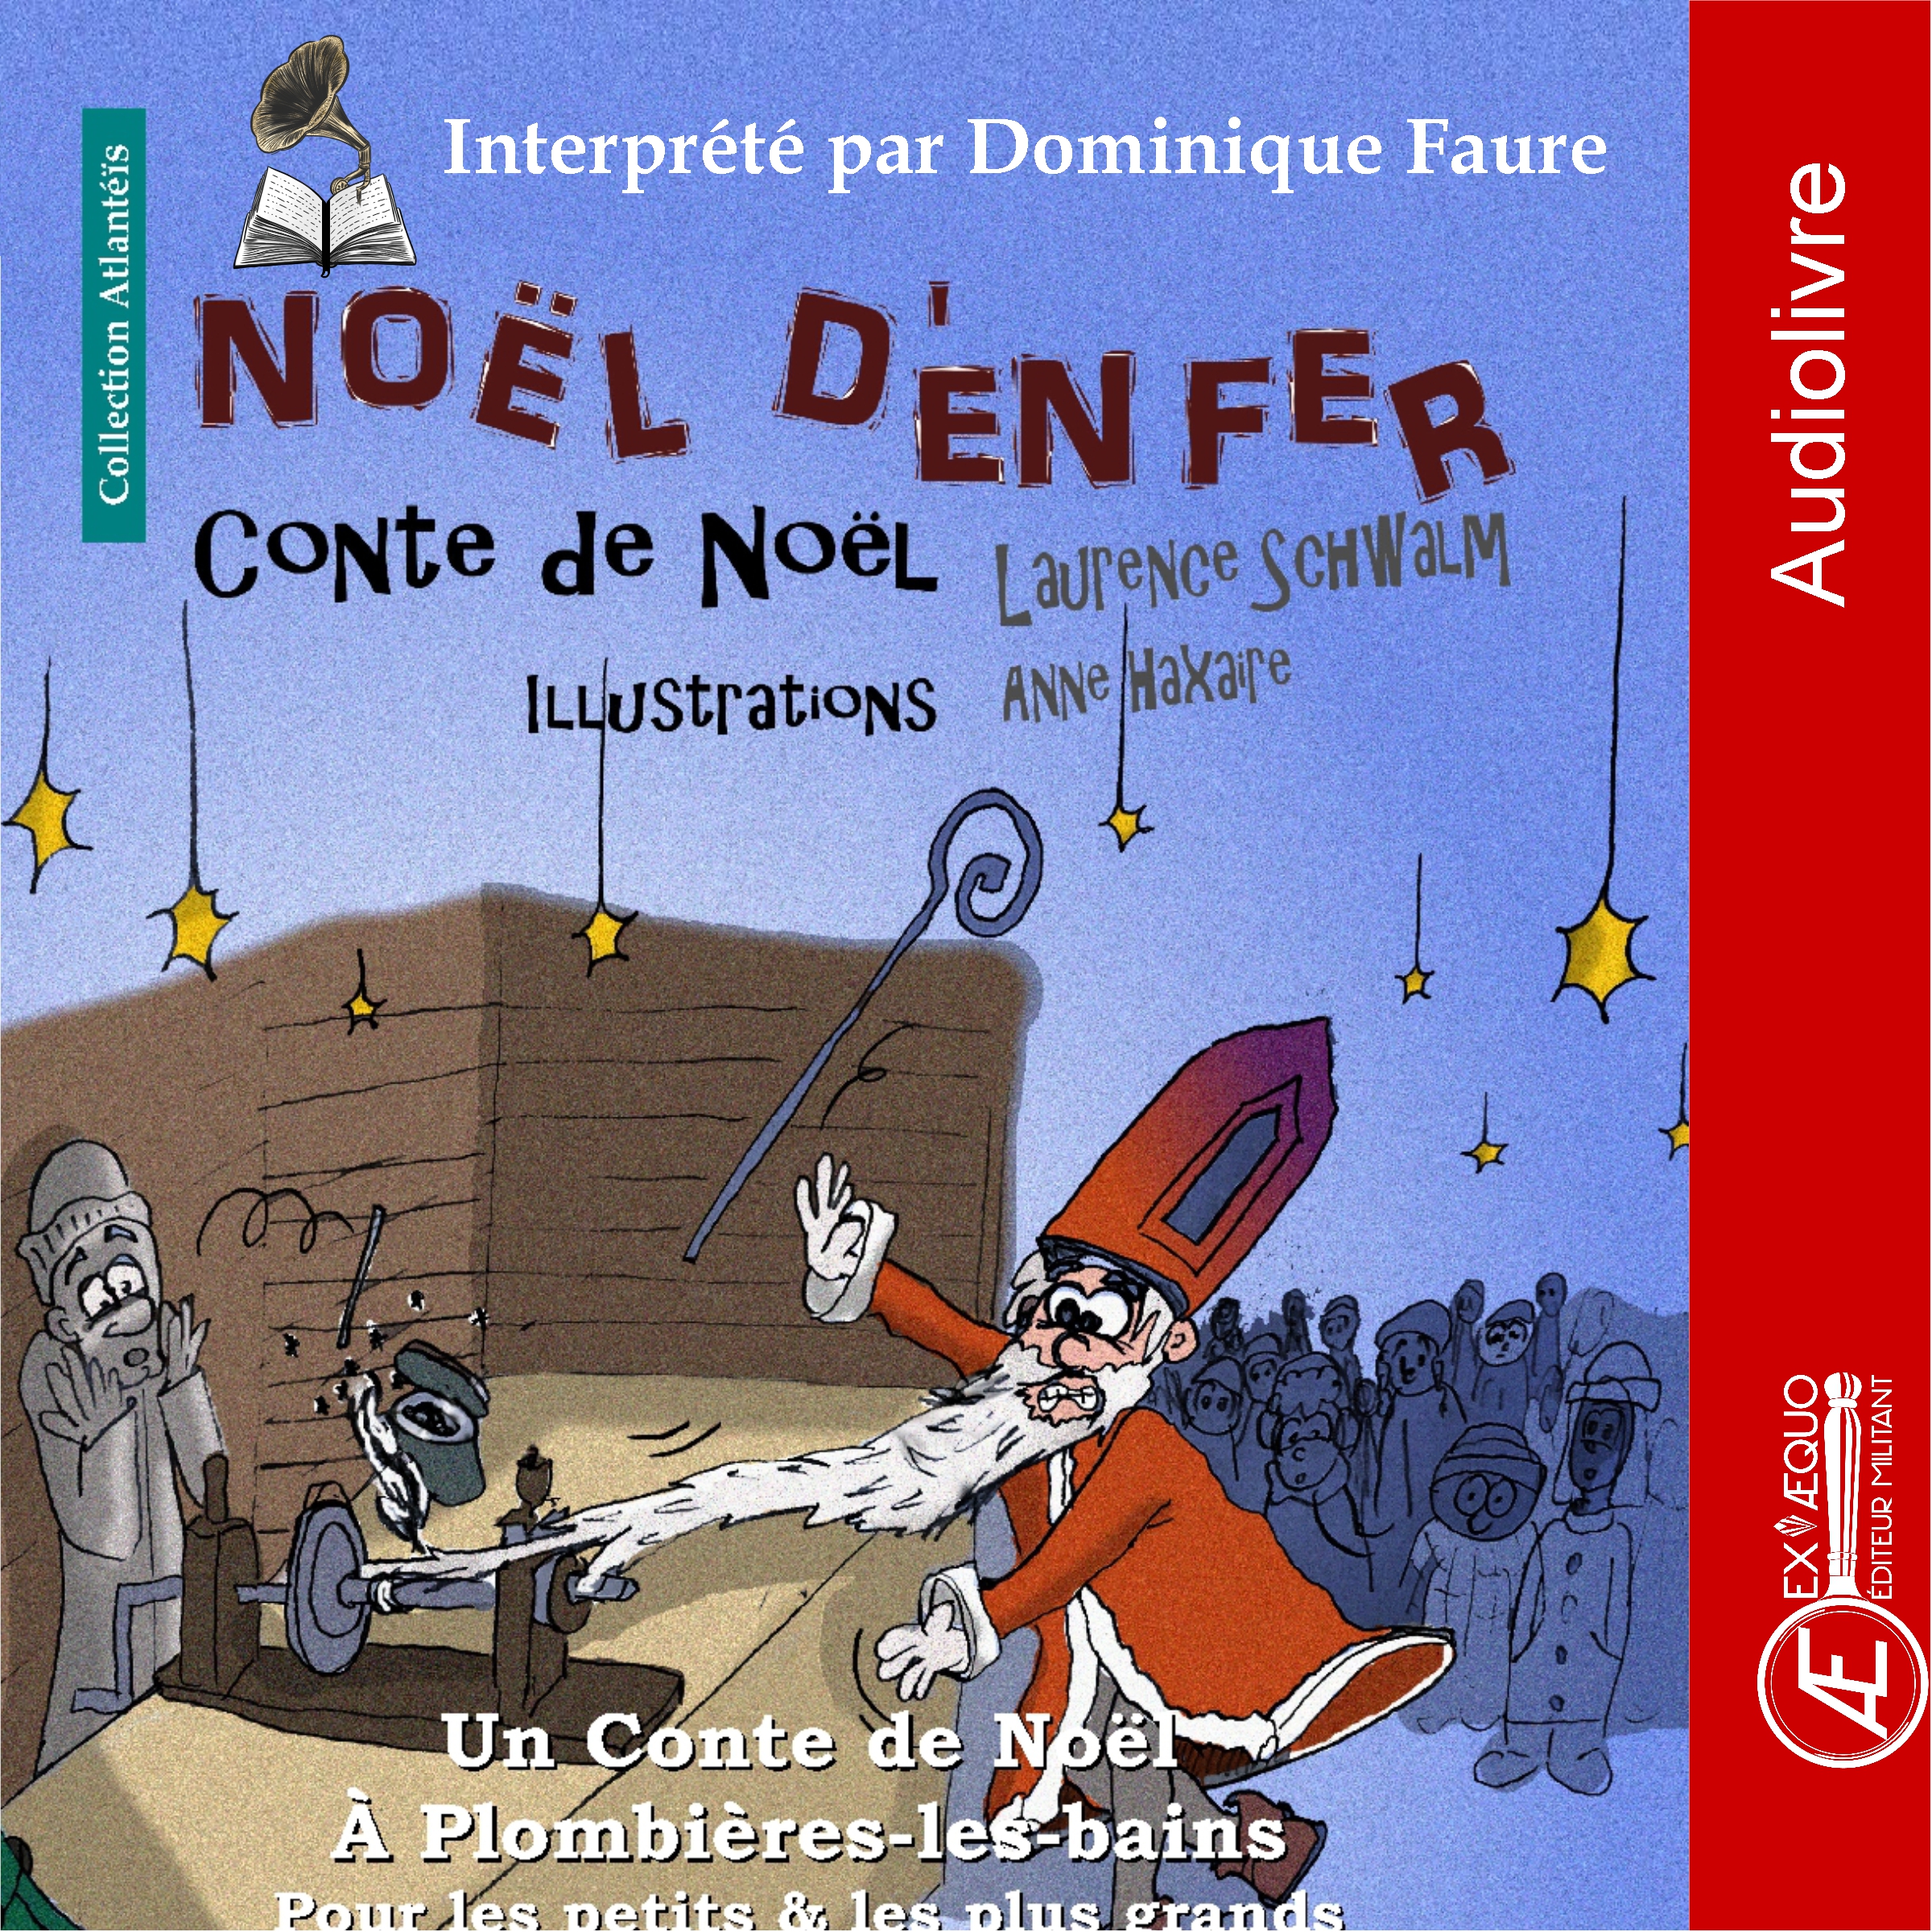 You are currently viewing Noel d’enfer – Audiolivre